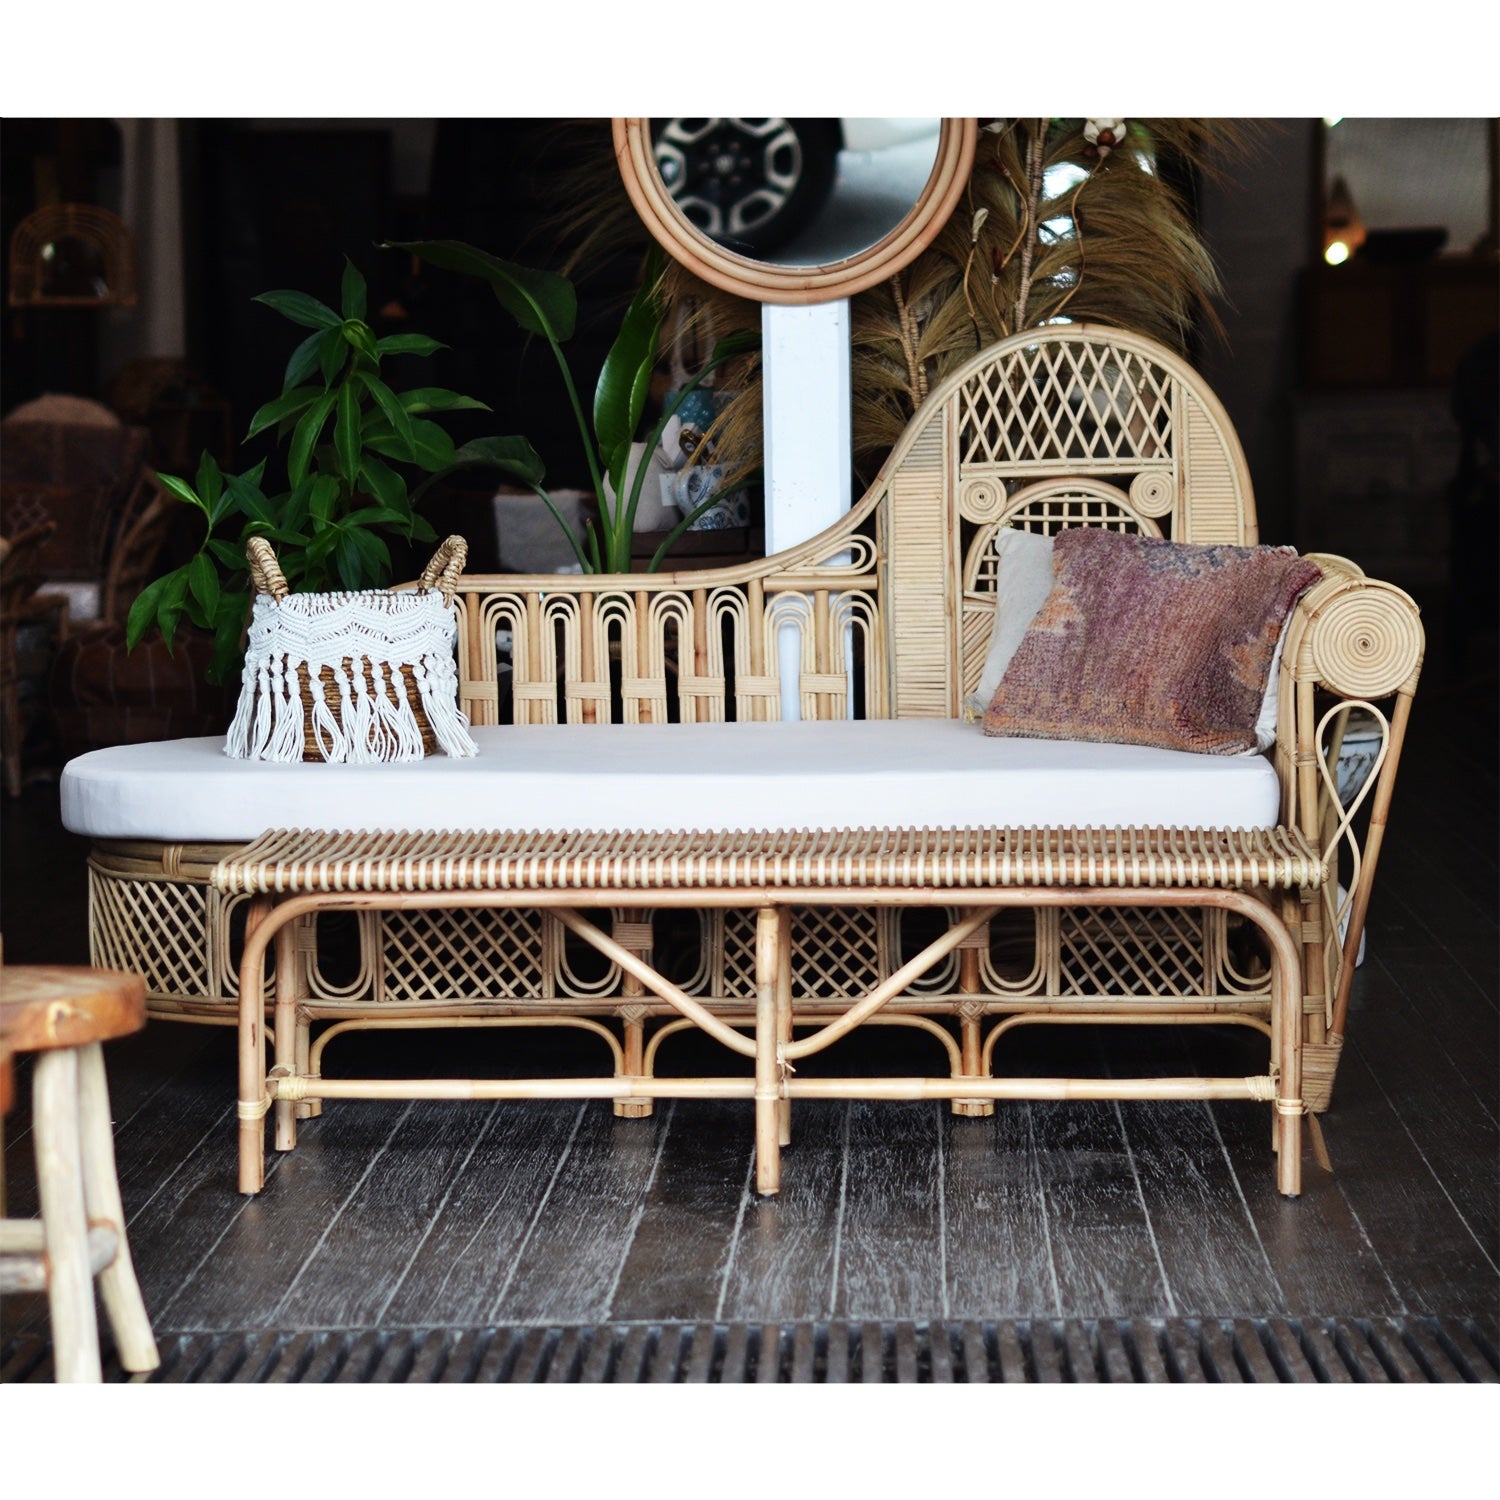 PREORDER -The King Natural Rattan Daybed - Natural